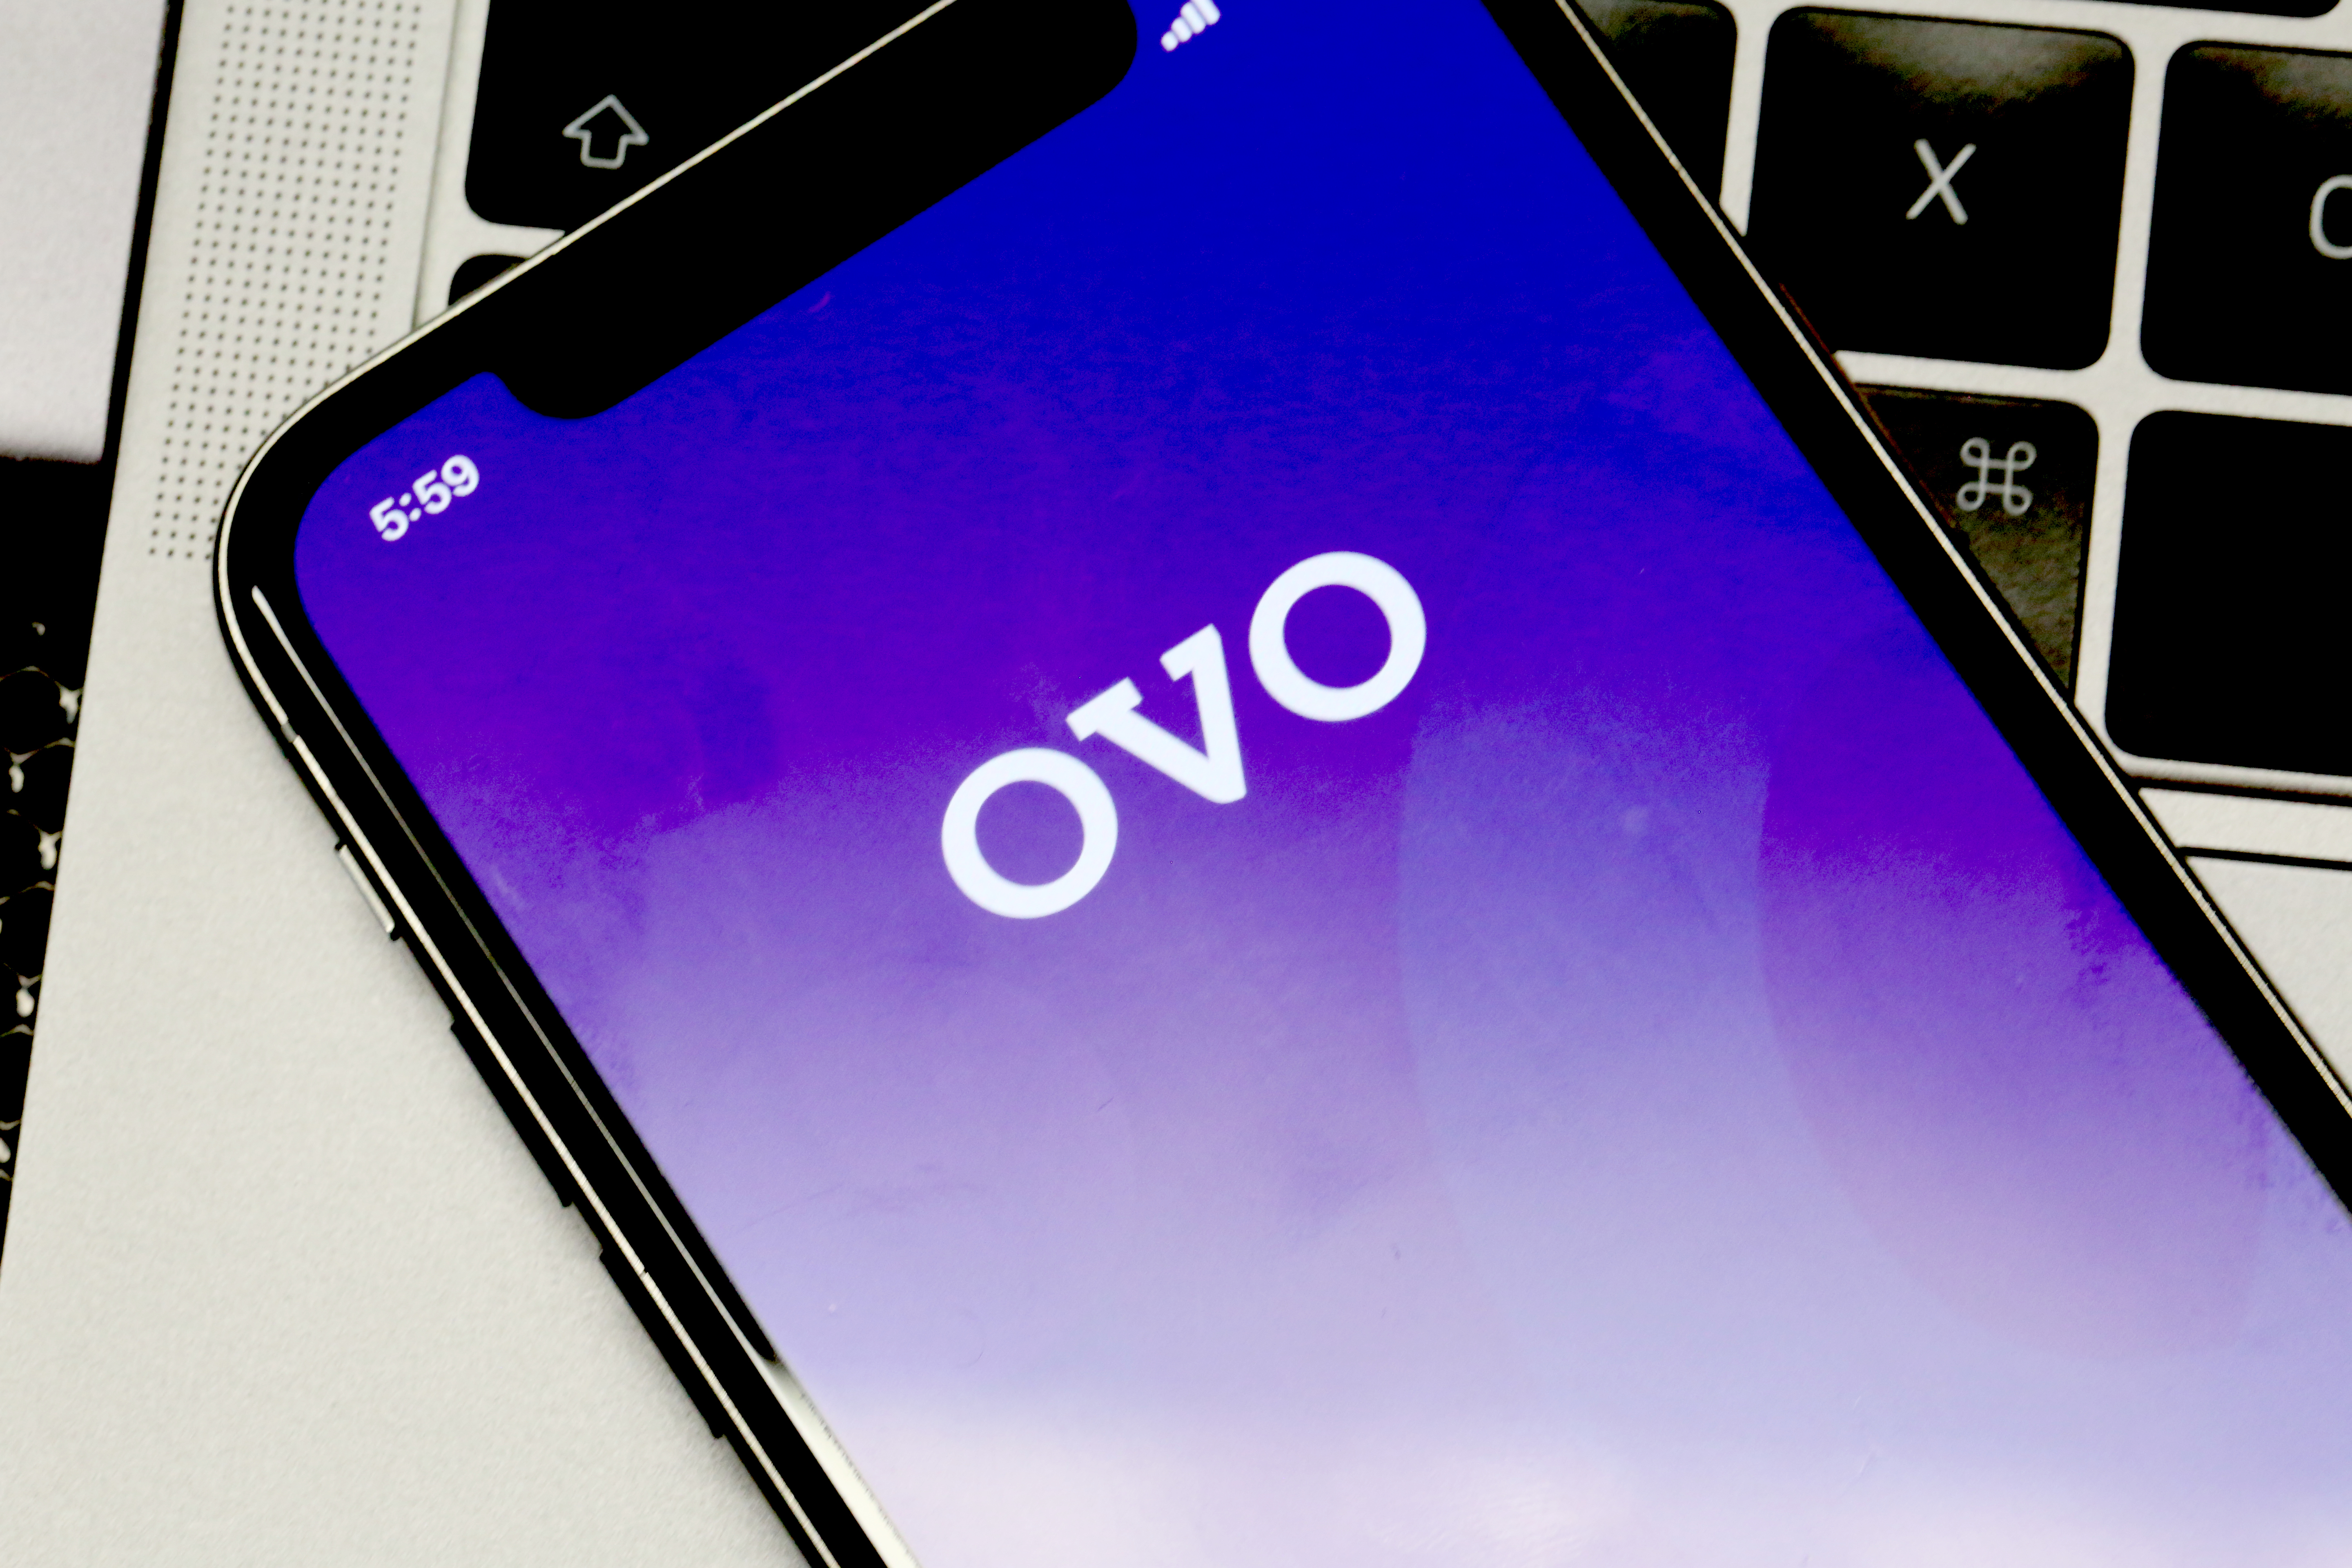 Ovo partners with Prudential to launch digital insurance services